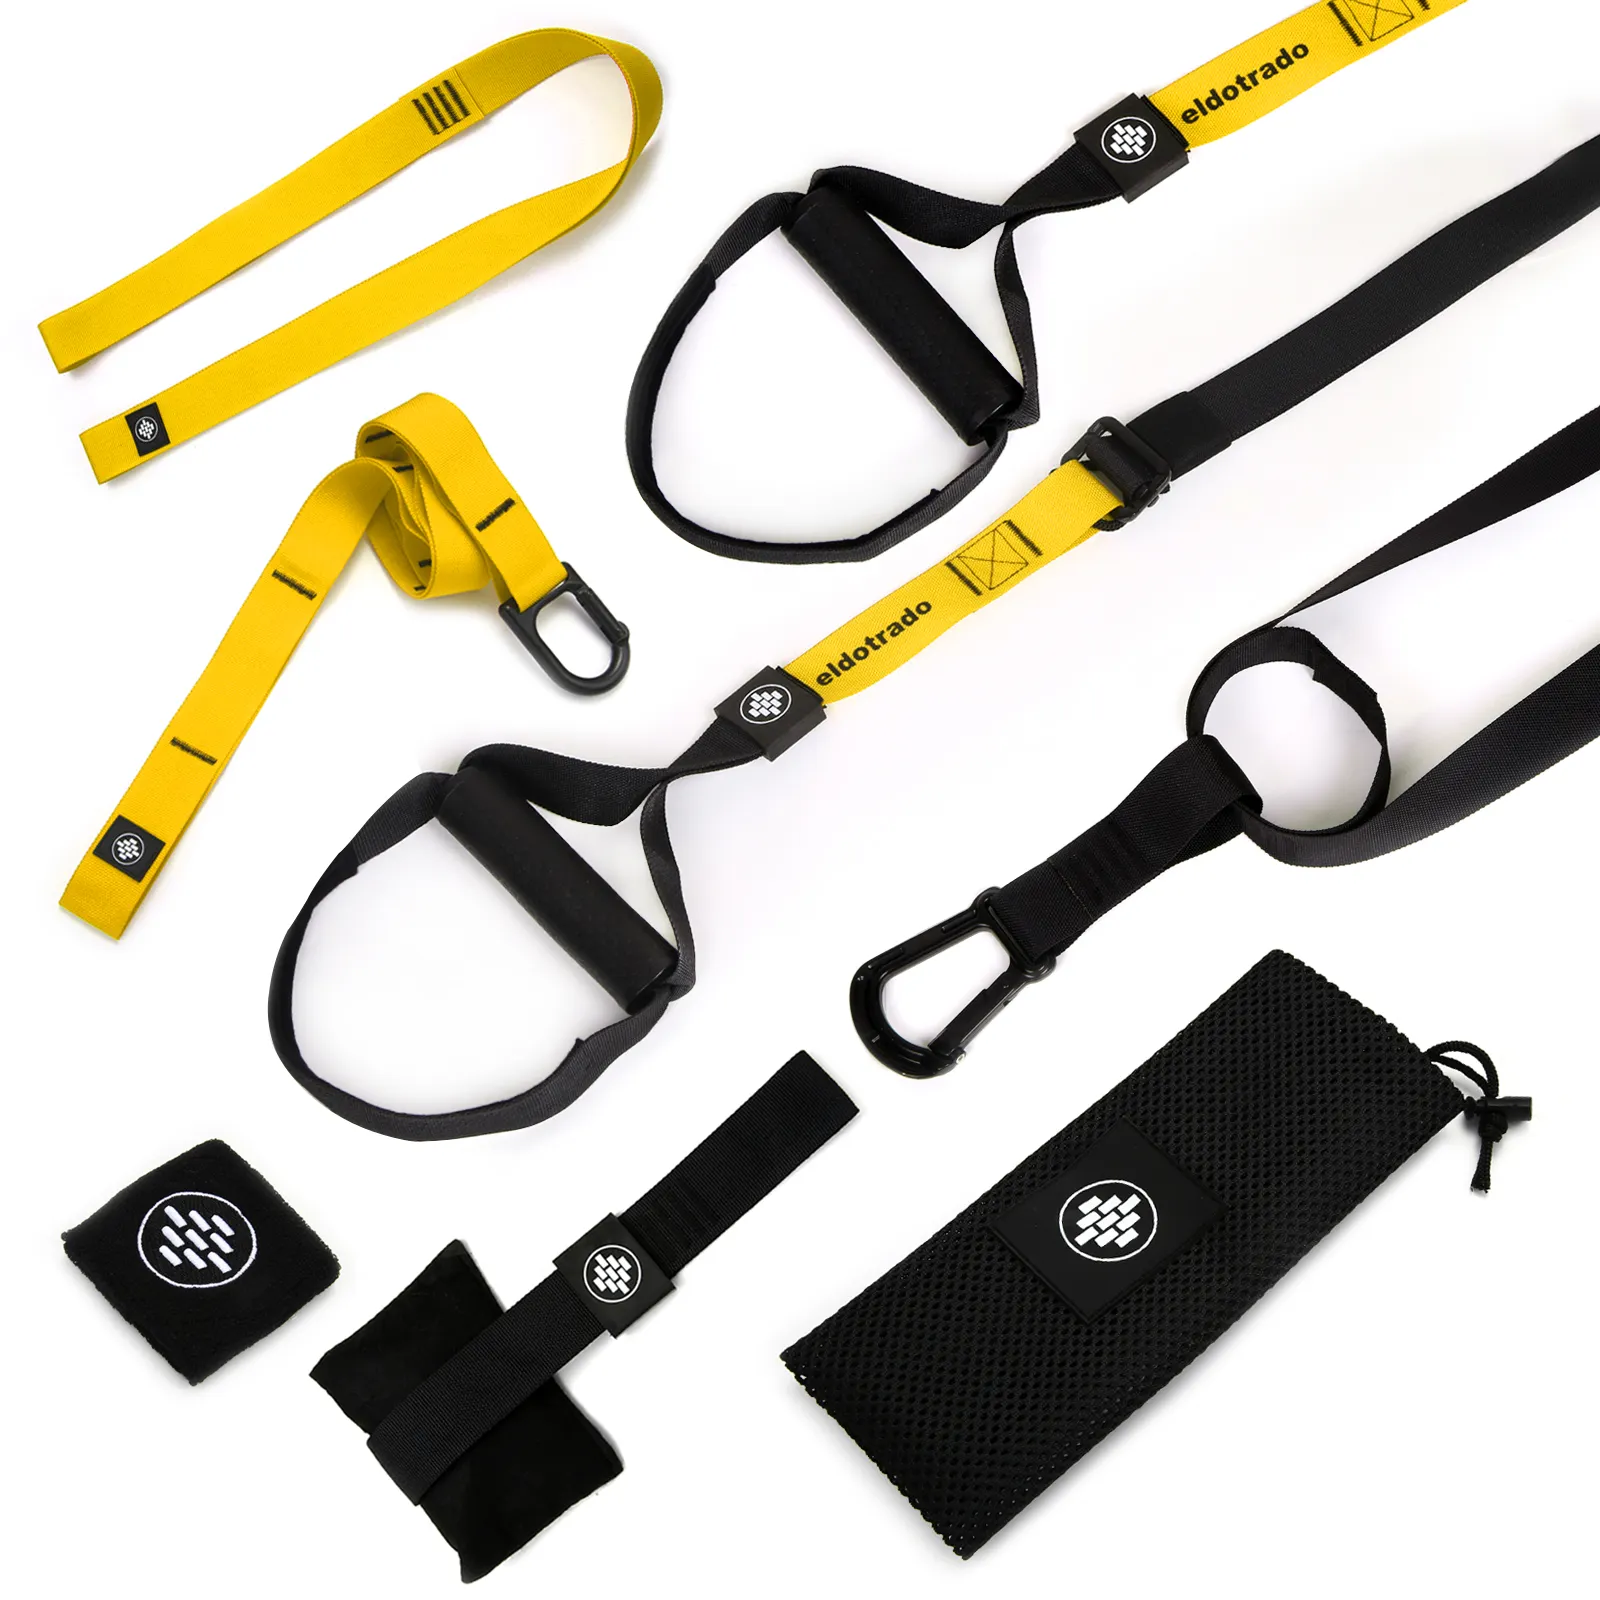 Bodyweight Resistance Trainer Kit - All in one kit can Quickly Train Without tedious Installation